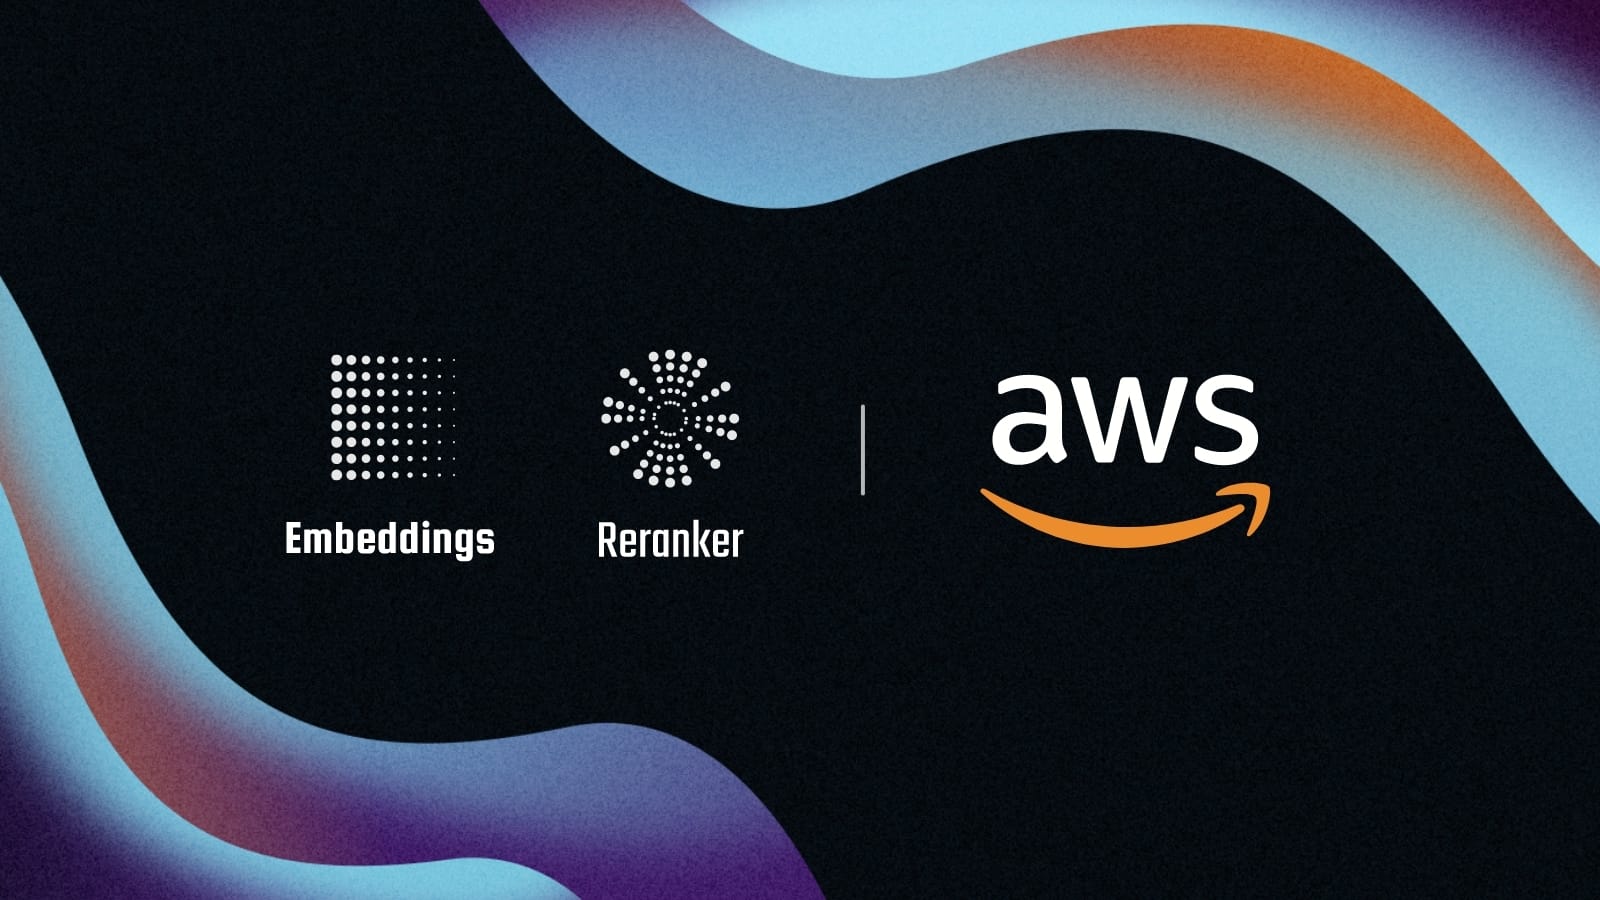 Abstract image with colorful wavy background featuring AWS, Embeddings, and Reranker logos.